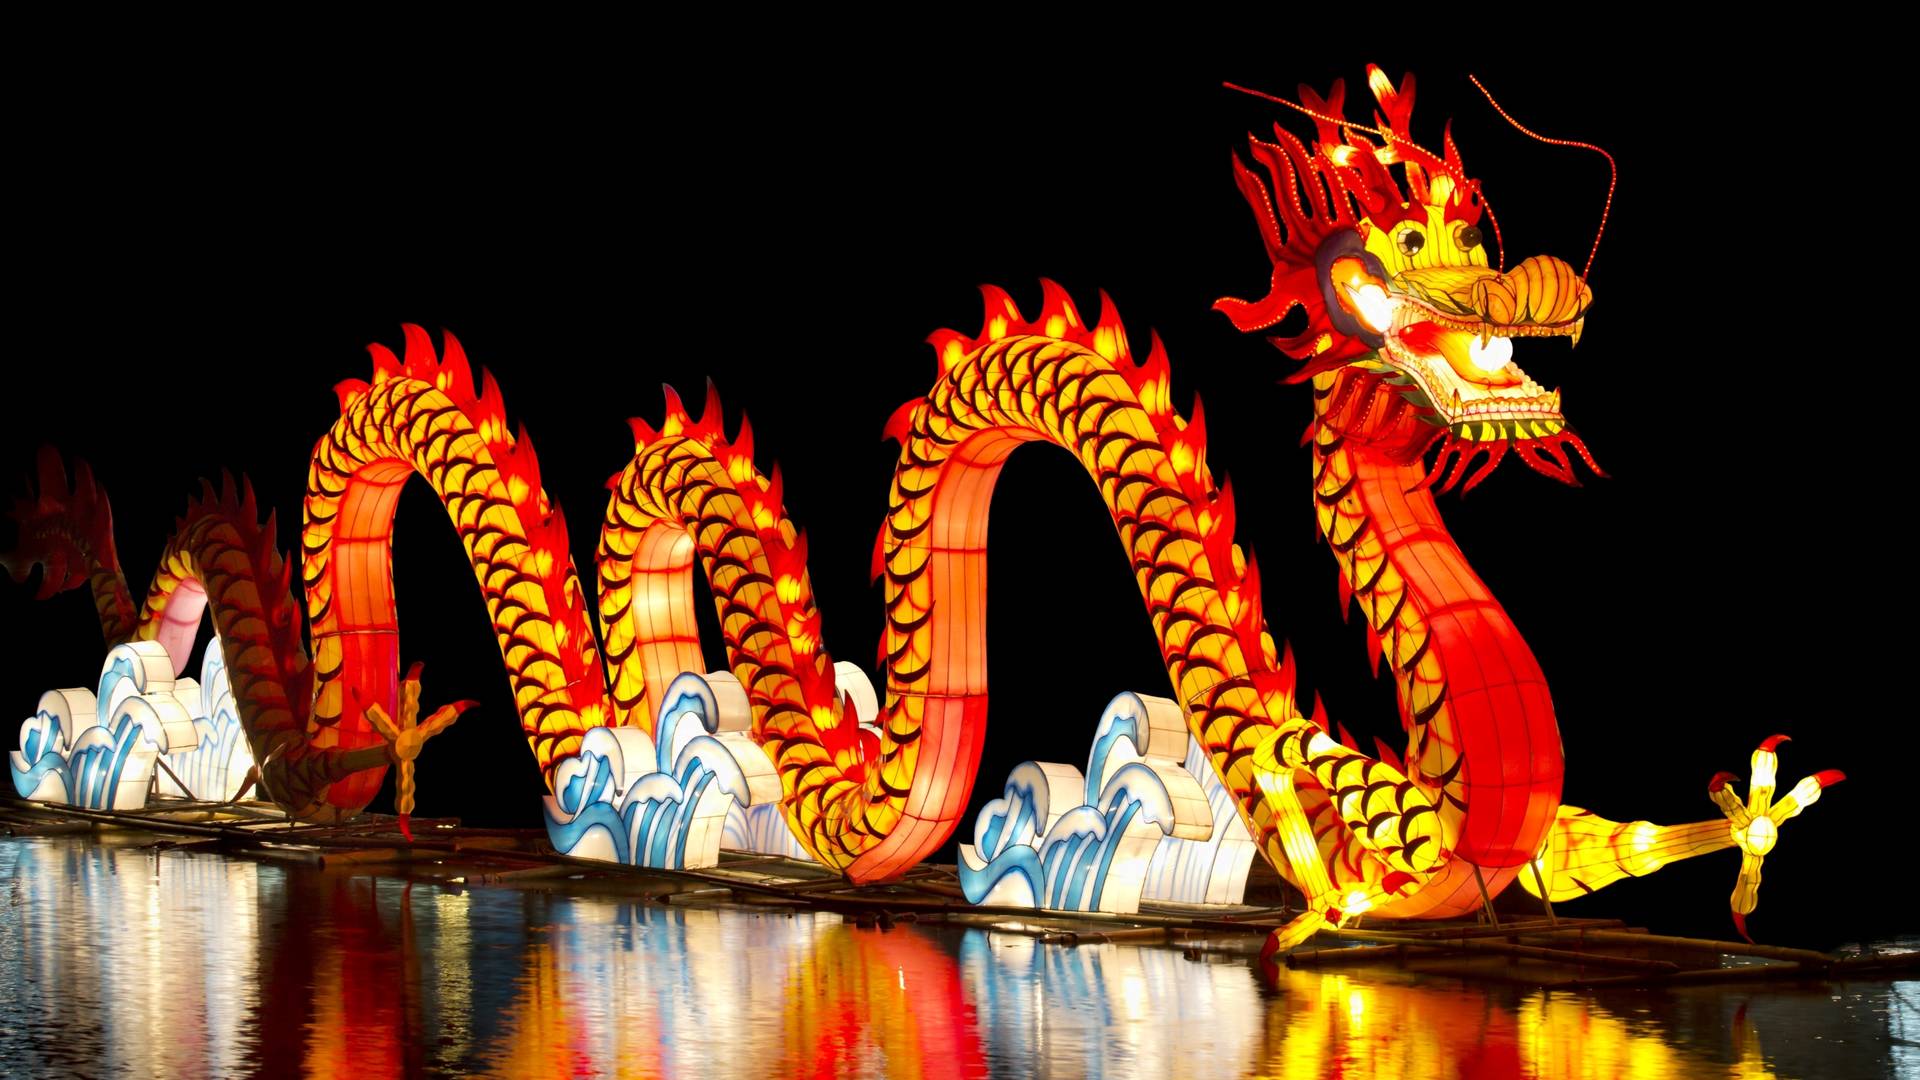 A lit up Chinese dragon on Chinese New Year